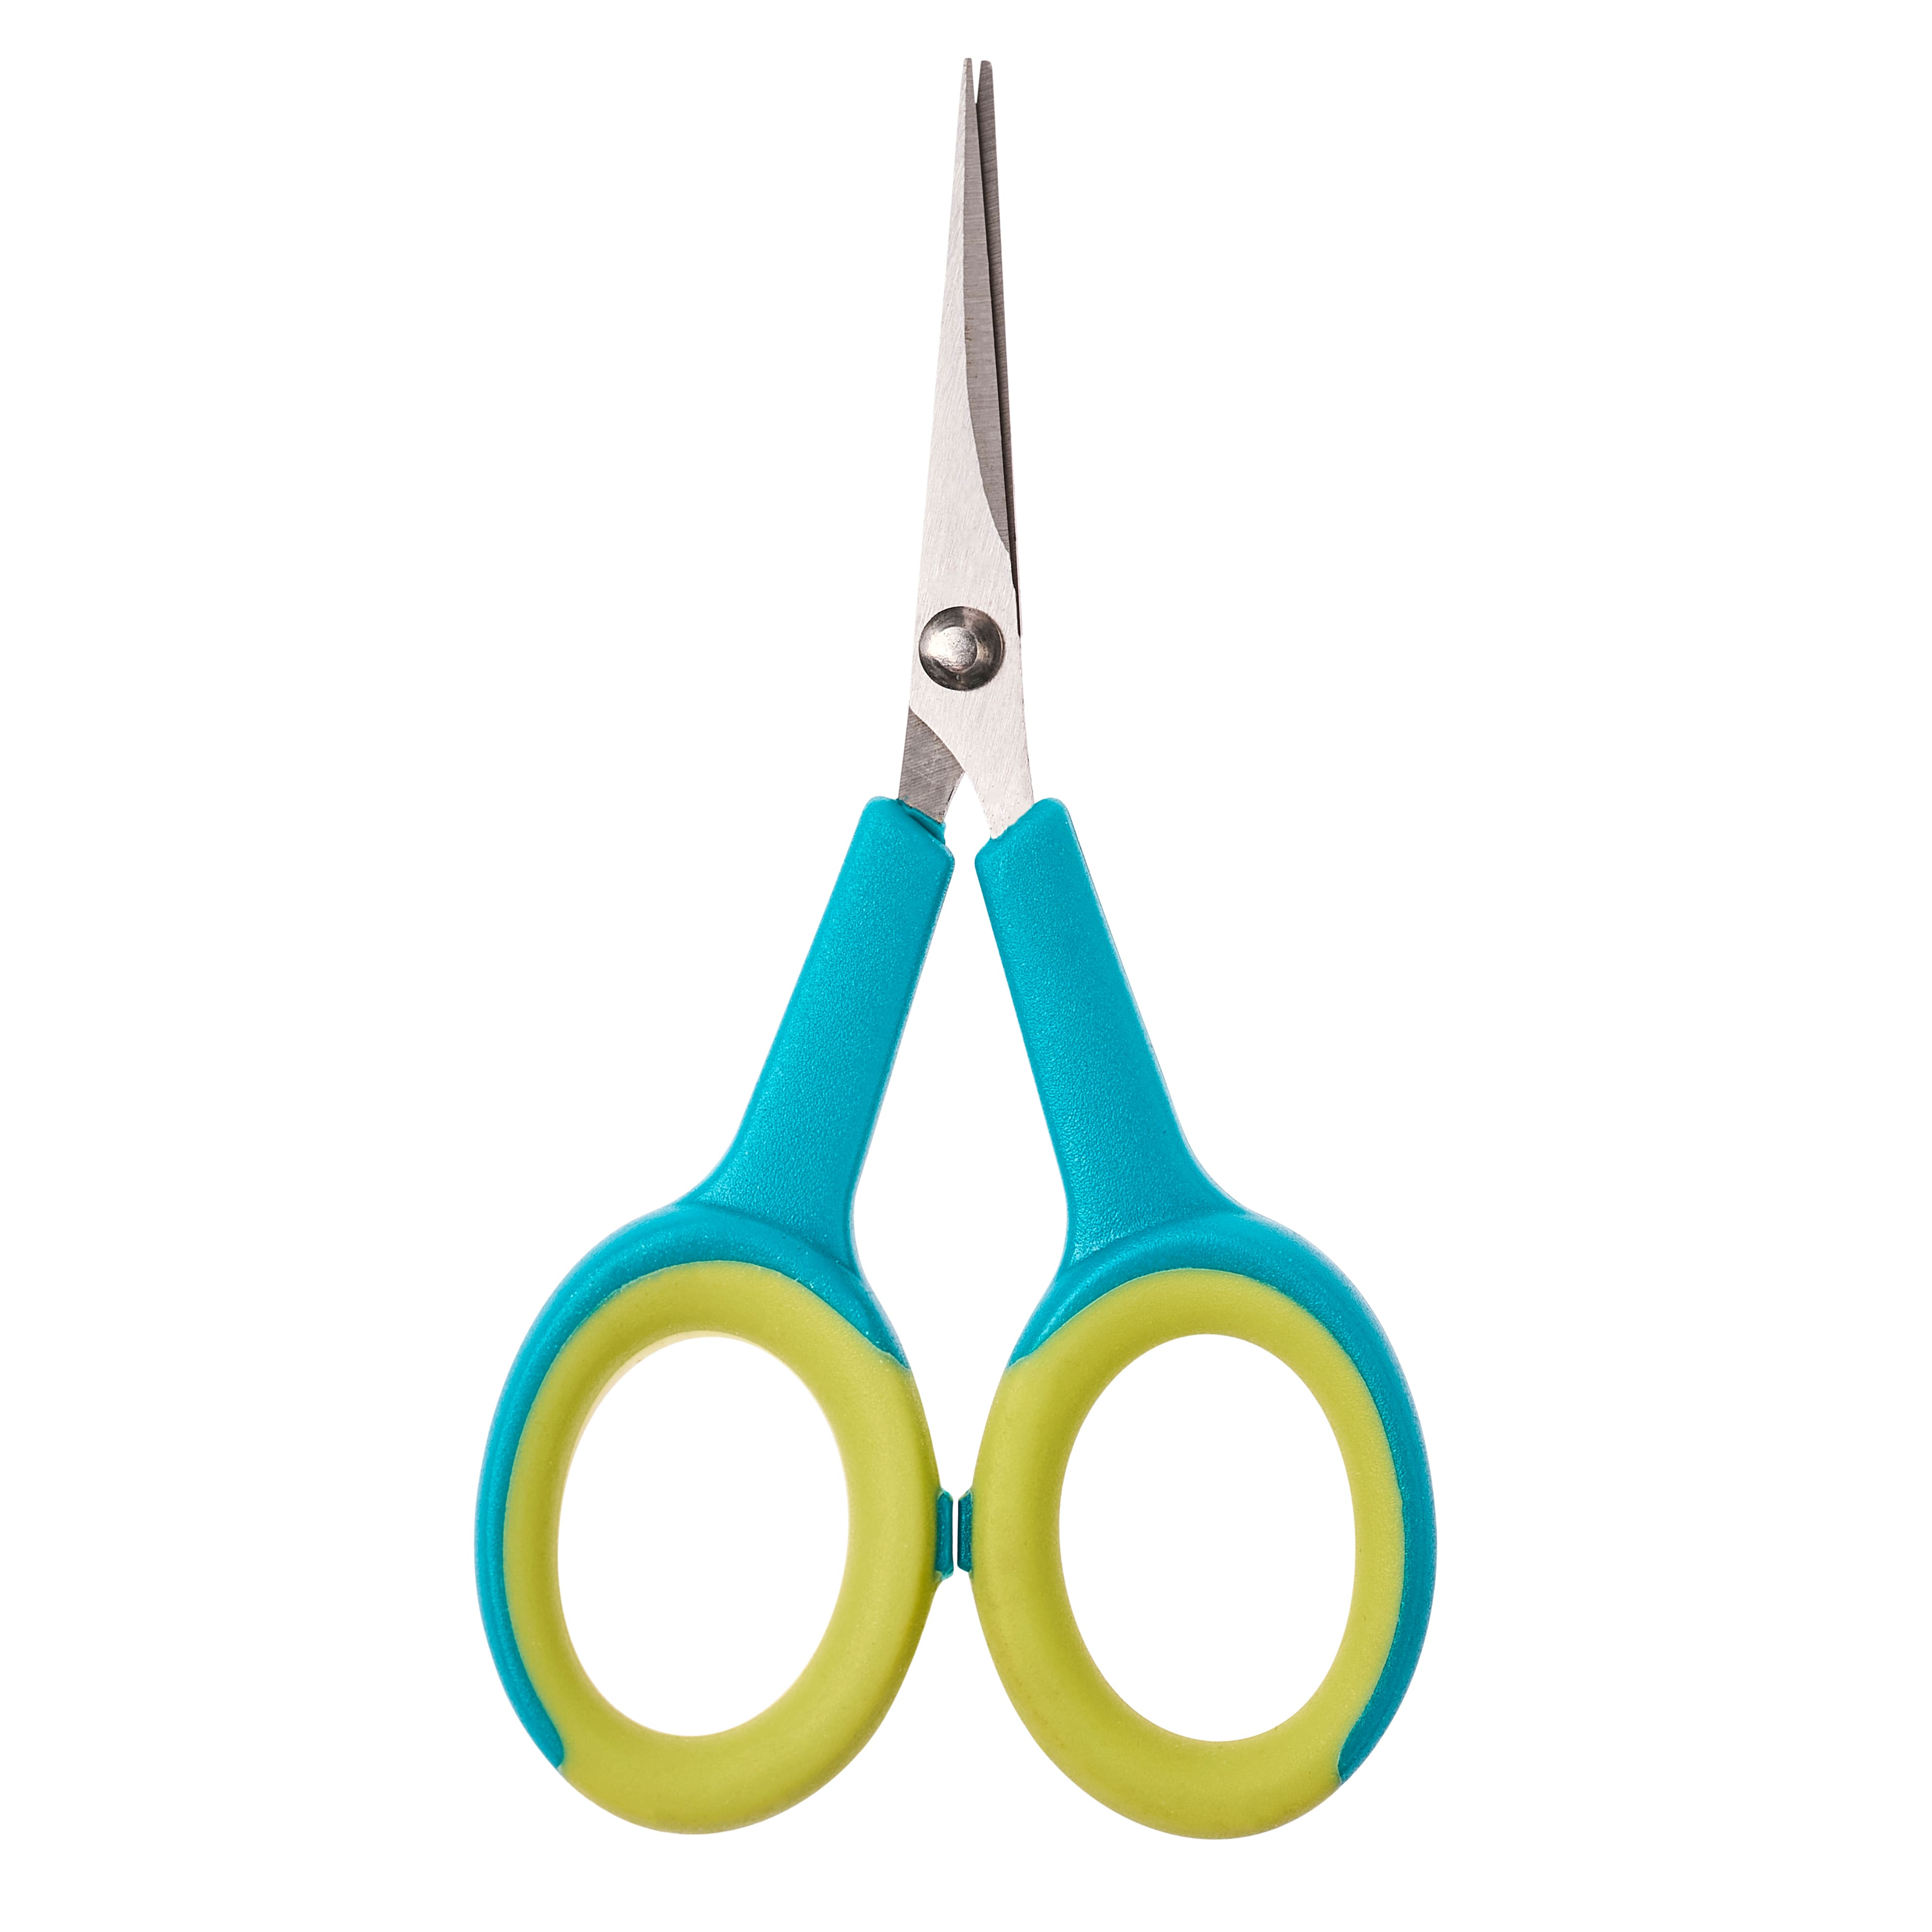 Havel's™ 3.5 Extra Fine Tip Double-Curved Embroidery Scissors